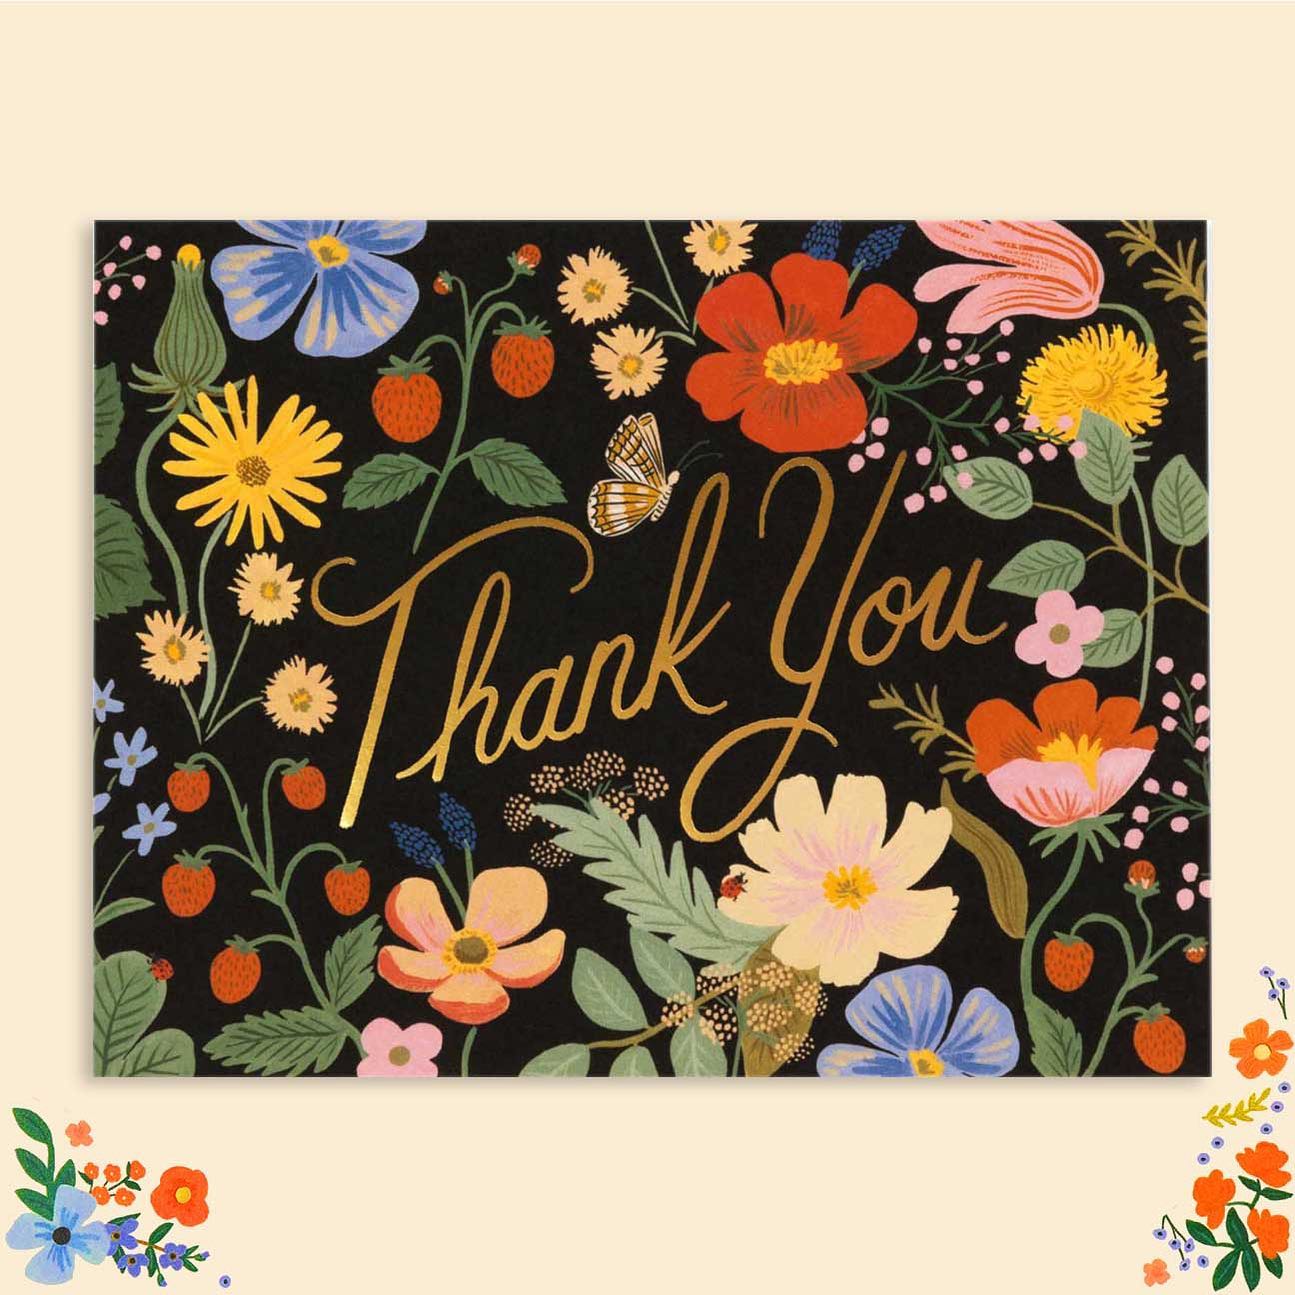 Our final thank you card is here for... you! Thanks for your continued support. So happy that we managed to raise $2433 for the Red Cross through people trying out our new online store during June. Every little bit counts.We still have stock in our online store if you need to treat yourself - get in touch by email or dm!...#singaporeshopping #sendlove #singaporedeals #riflepaper #outletstore #singapore #stayhome #stationery #giftcards #greetingcards #gooddesign